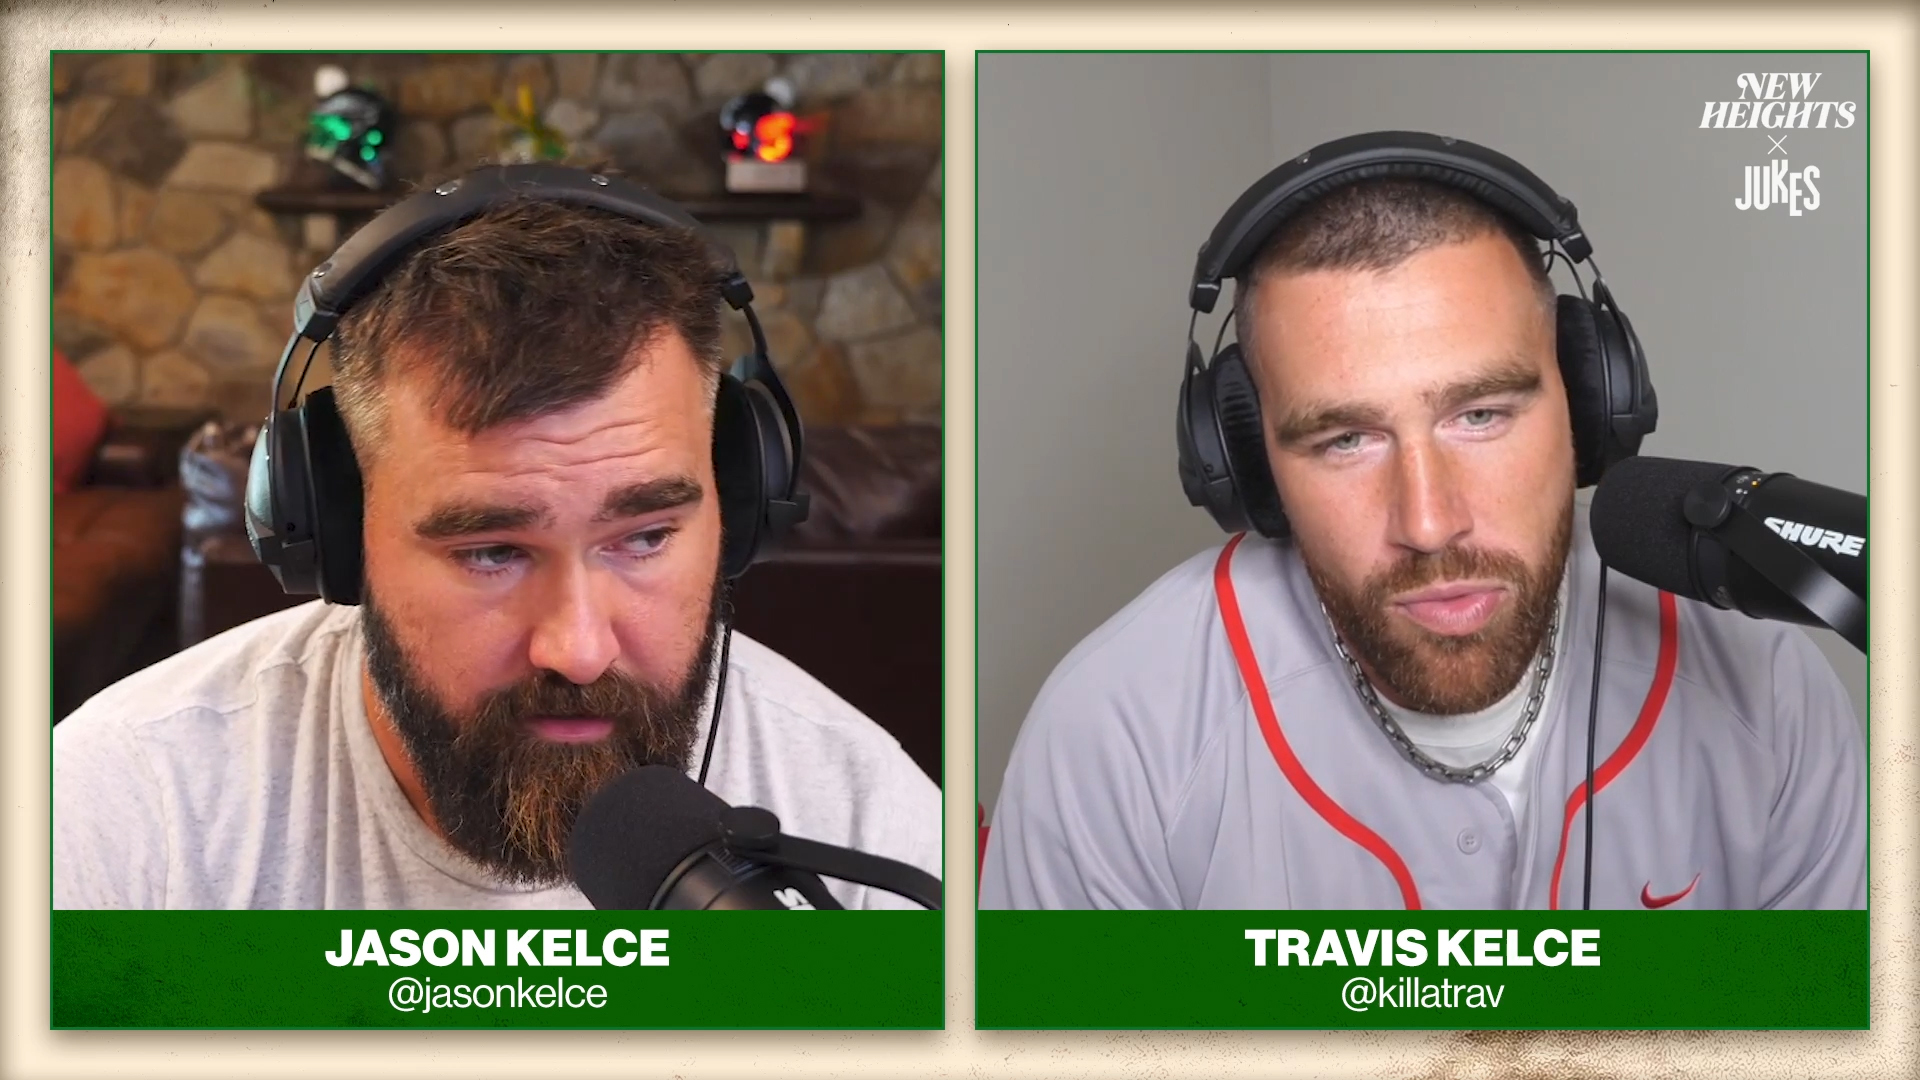 Philadelphia Eagles’ Jason Kelce talks about the quiet confidence and respect that teammate and quarterback Jalen Hurts commands in the huddle with Kansas City Chiefs’ Travis Kelce in their new show, “New Heights with Jason & Travis Kelce,” out now on YouTube and major podcast platforms.